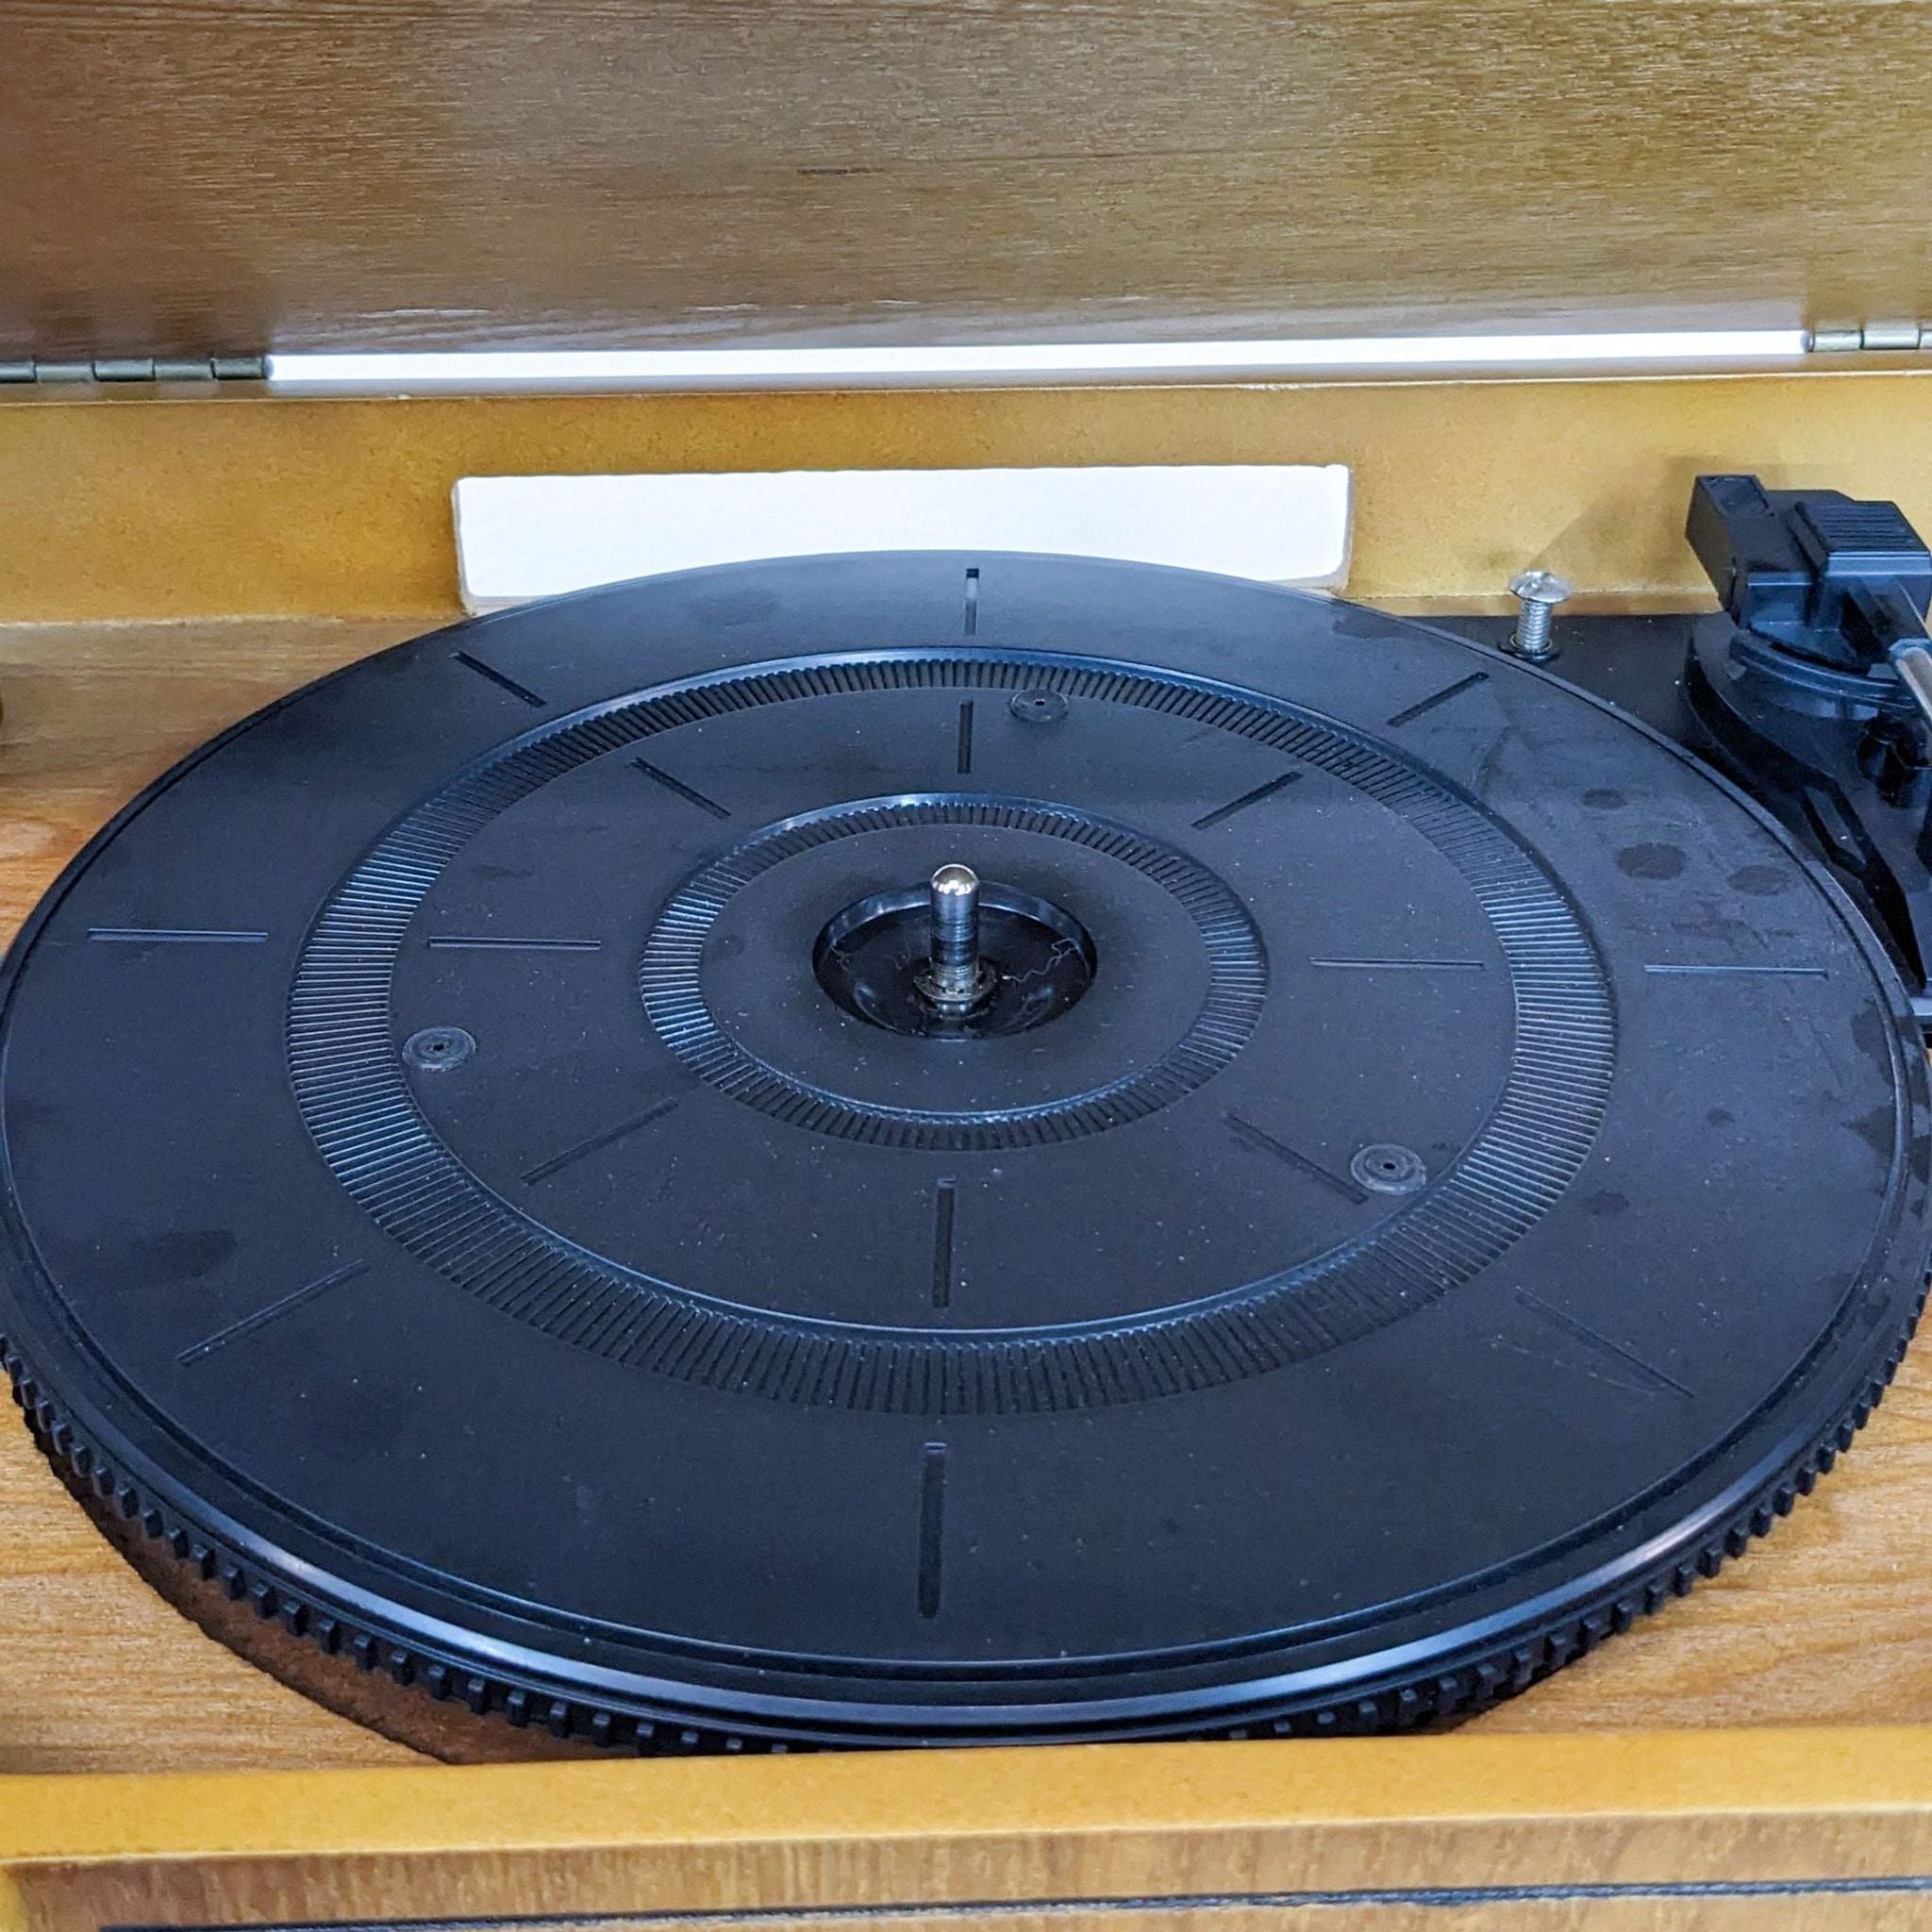 Close-up of the ITRR-401's turntable with detailed platter and tonearm.